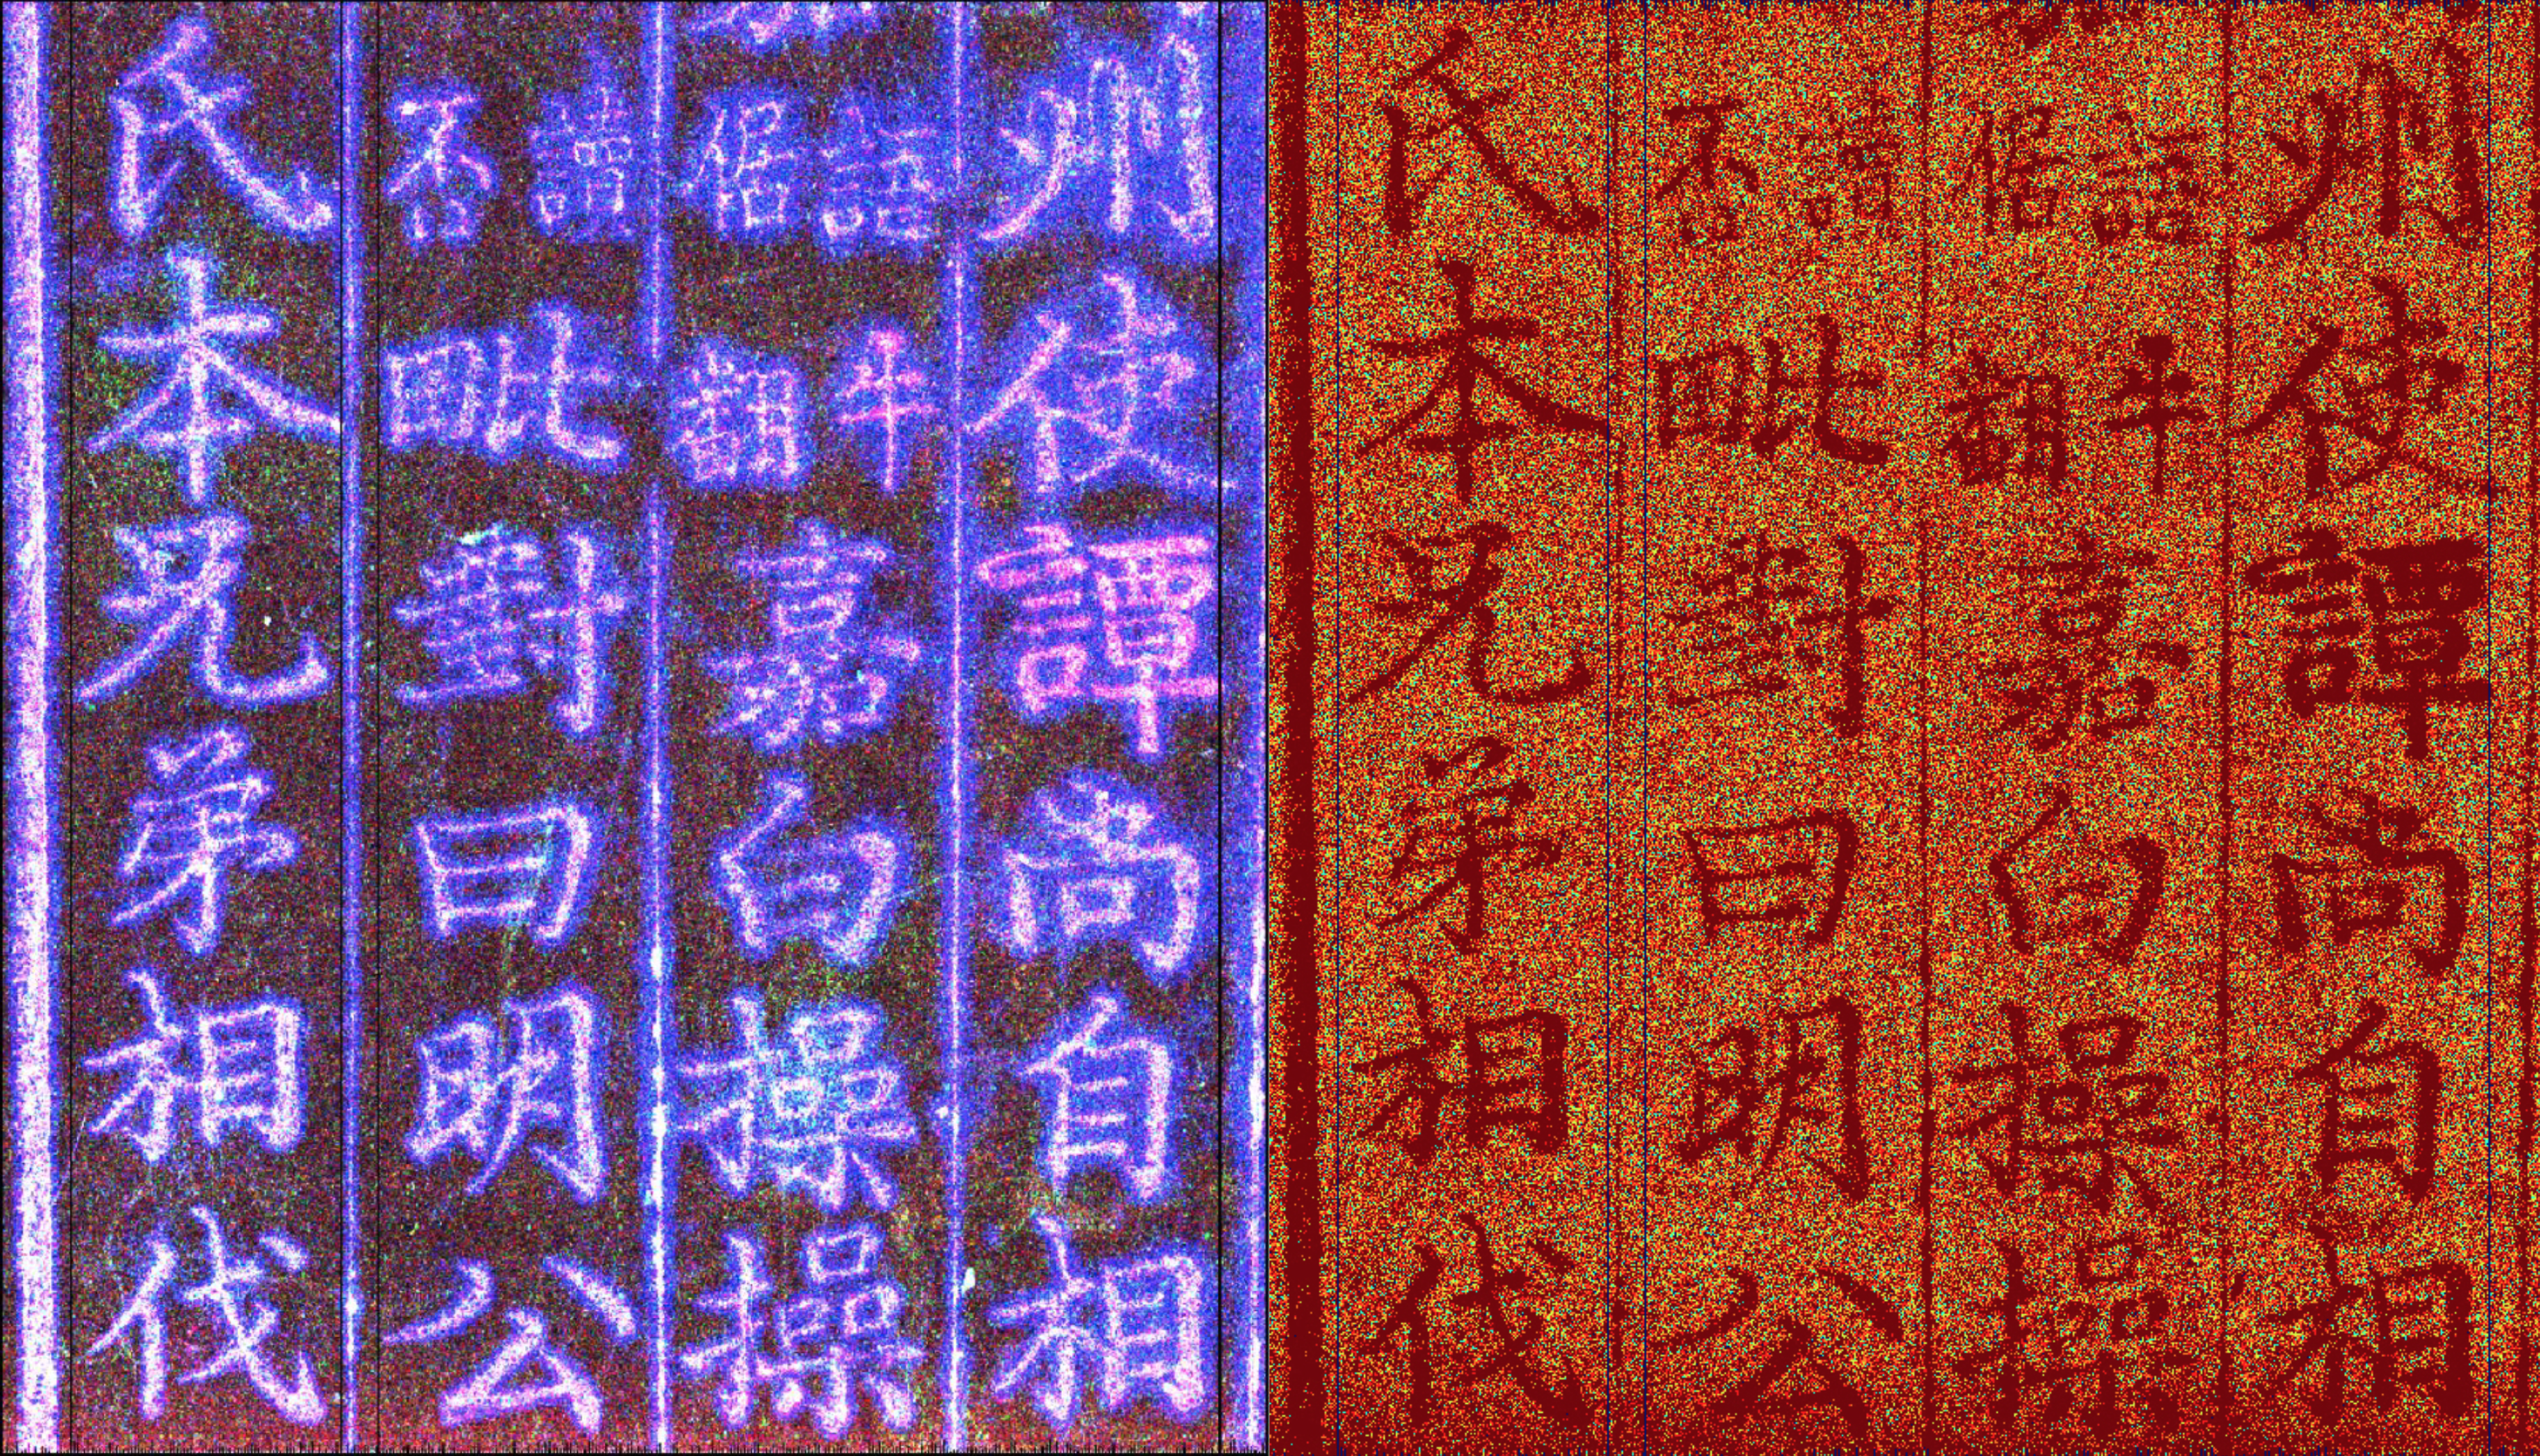 Two preliminary X-ray fluorescence scans of Korean documents. (Image: Mike Toth/SLAC National Accelerator Laboratory)